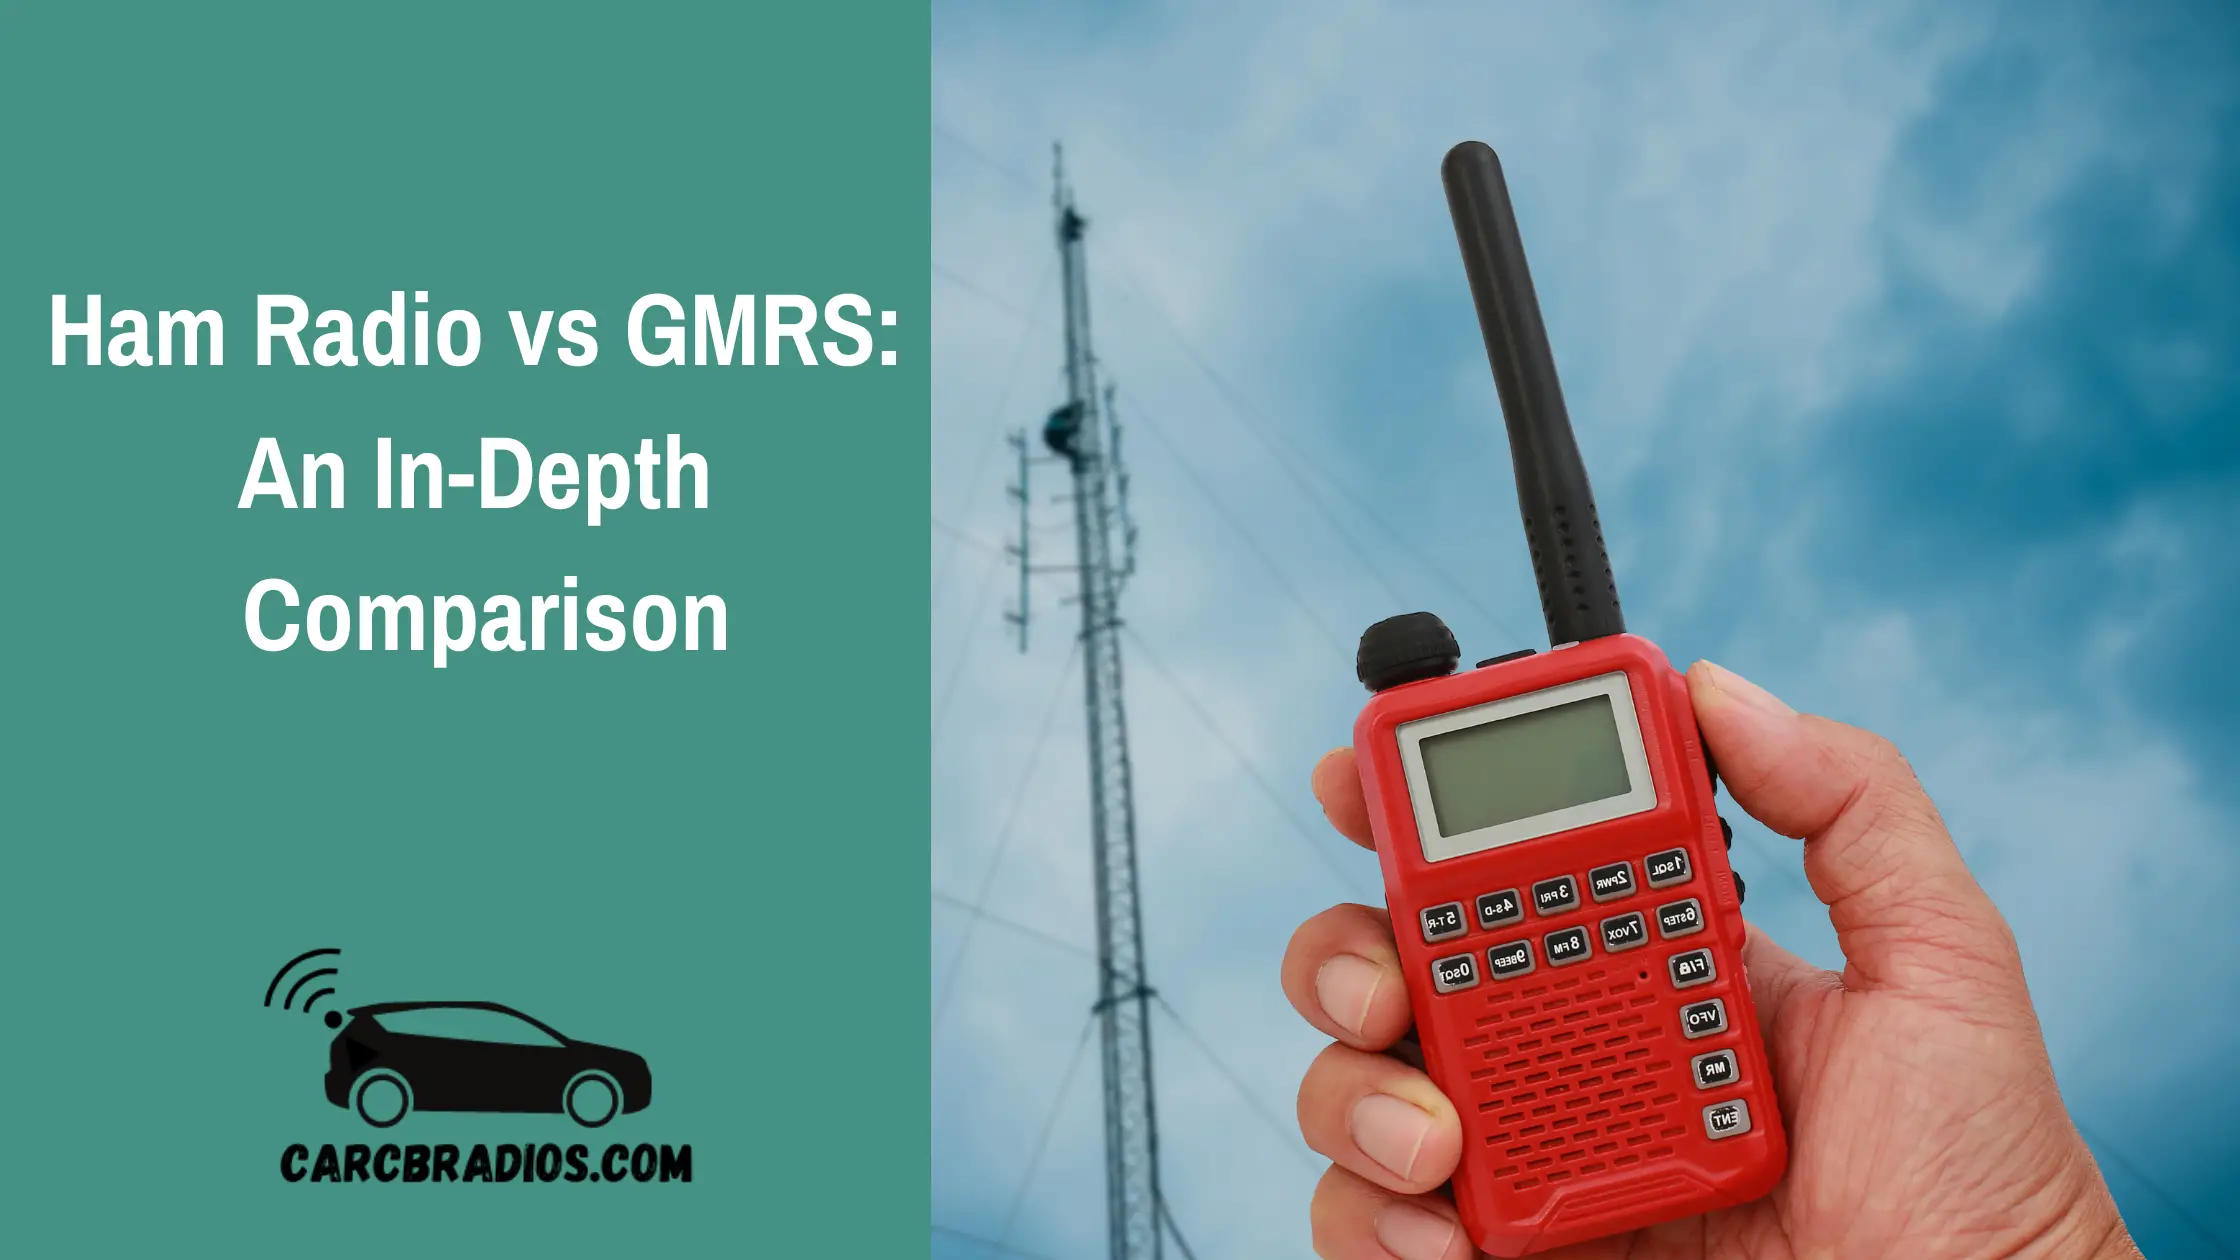 Ham Radio, also known as amateur radio, is a popular choice among hobbyists, emergency responders, and those looking to connect with a global community of operators. In contrast, GMRS is a land-mobile FM UHF radio service that caters to families and small groups looking for short-range communication.